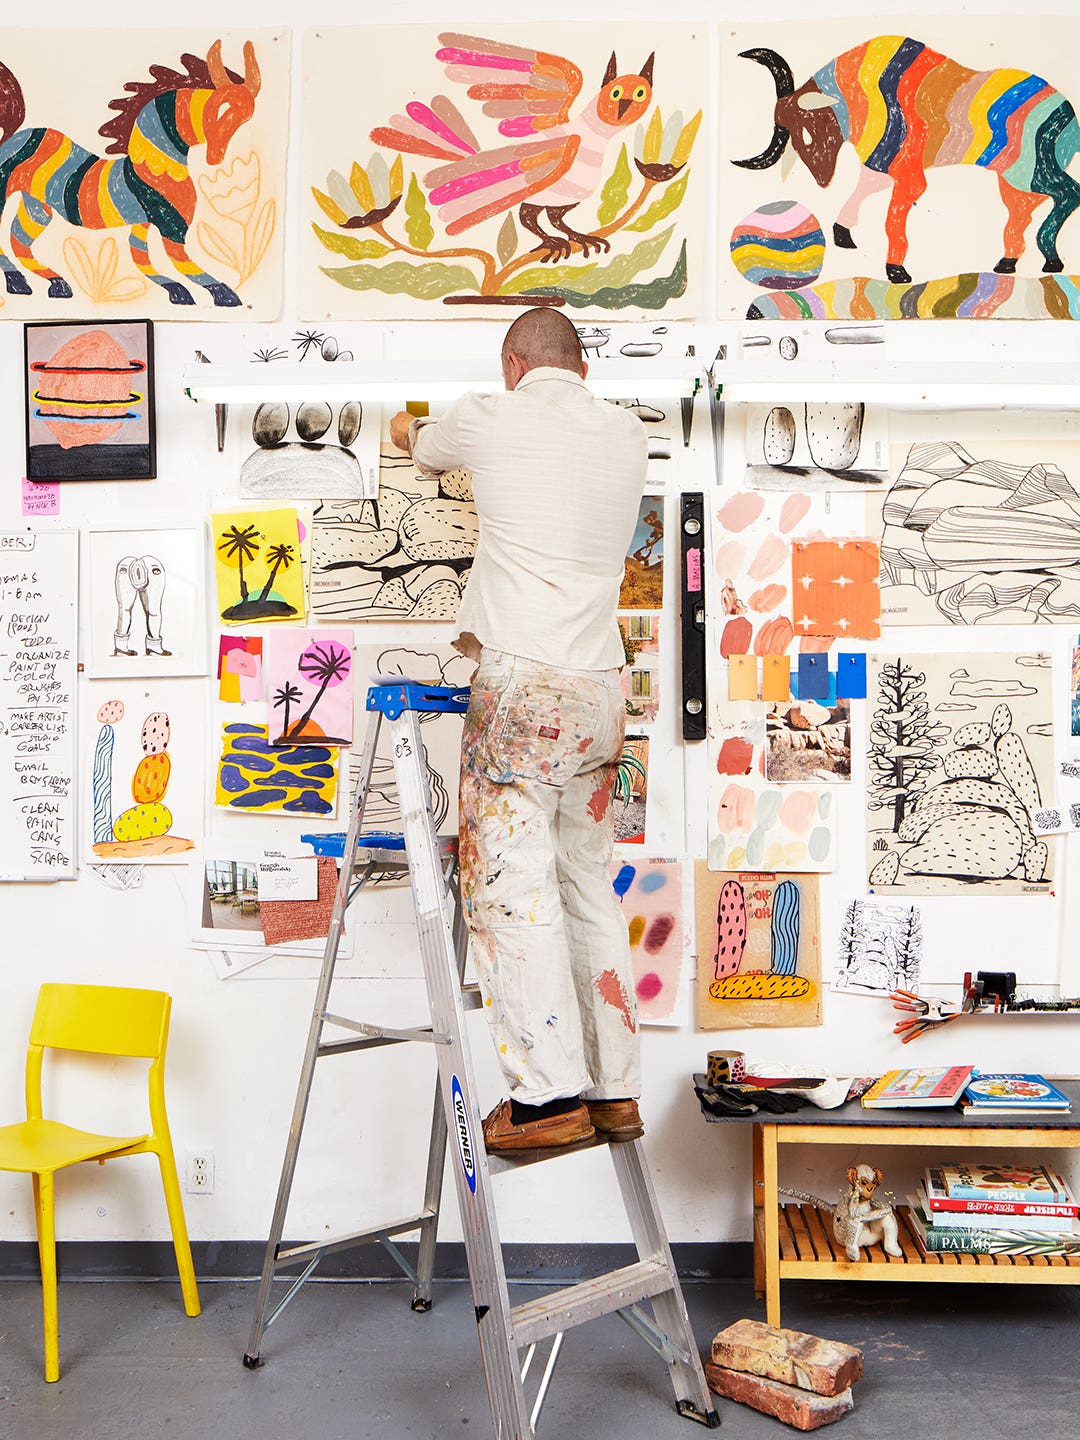 Expressive Color Is the Connector Between This L.A. Artist’s Studio and Home